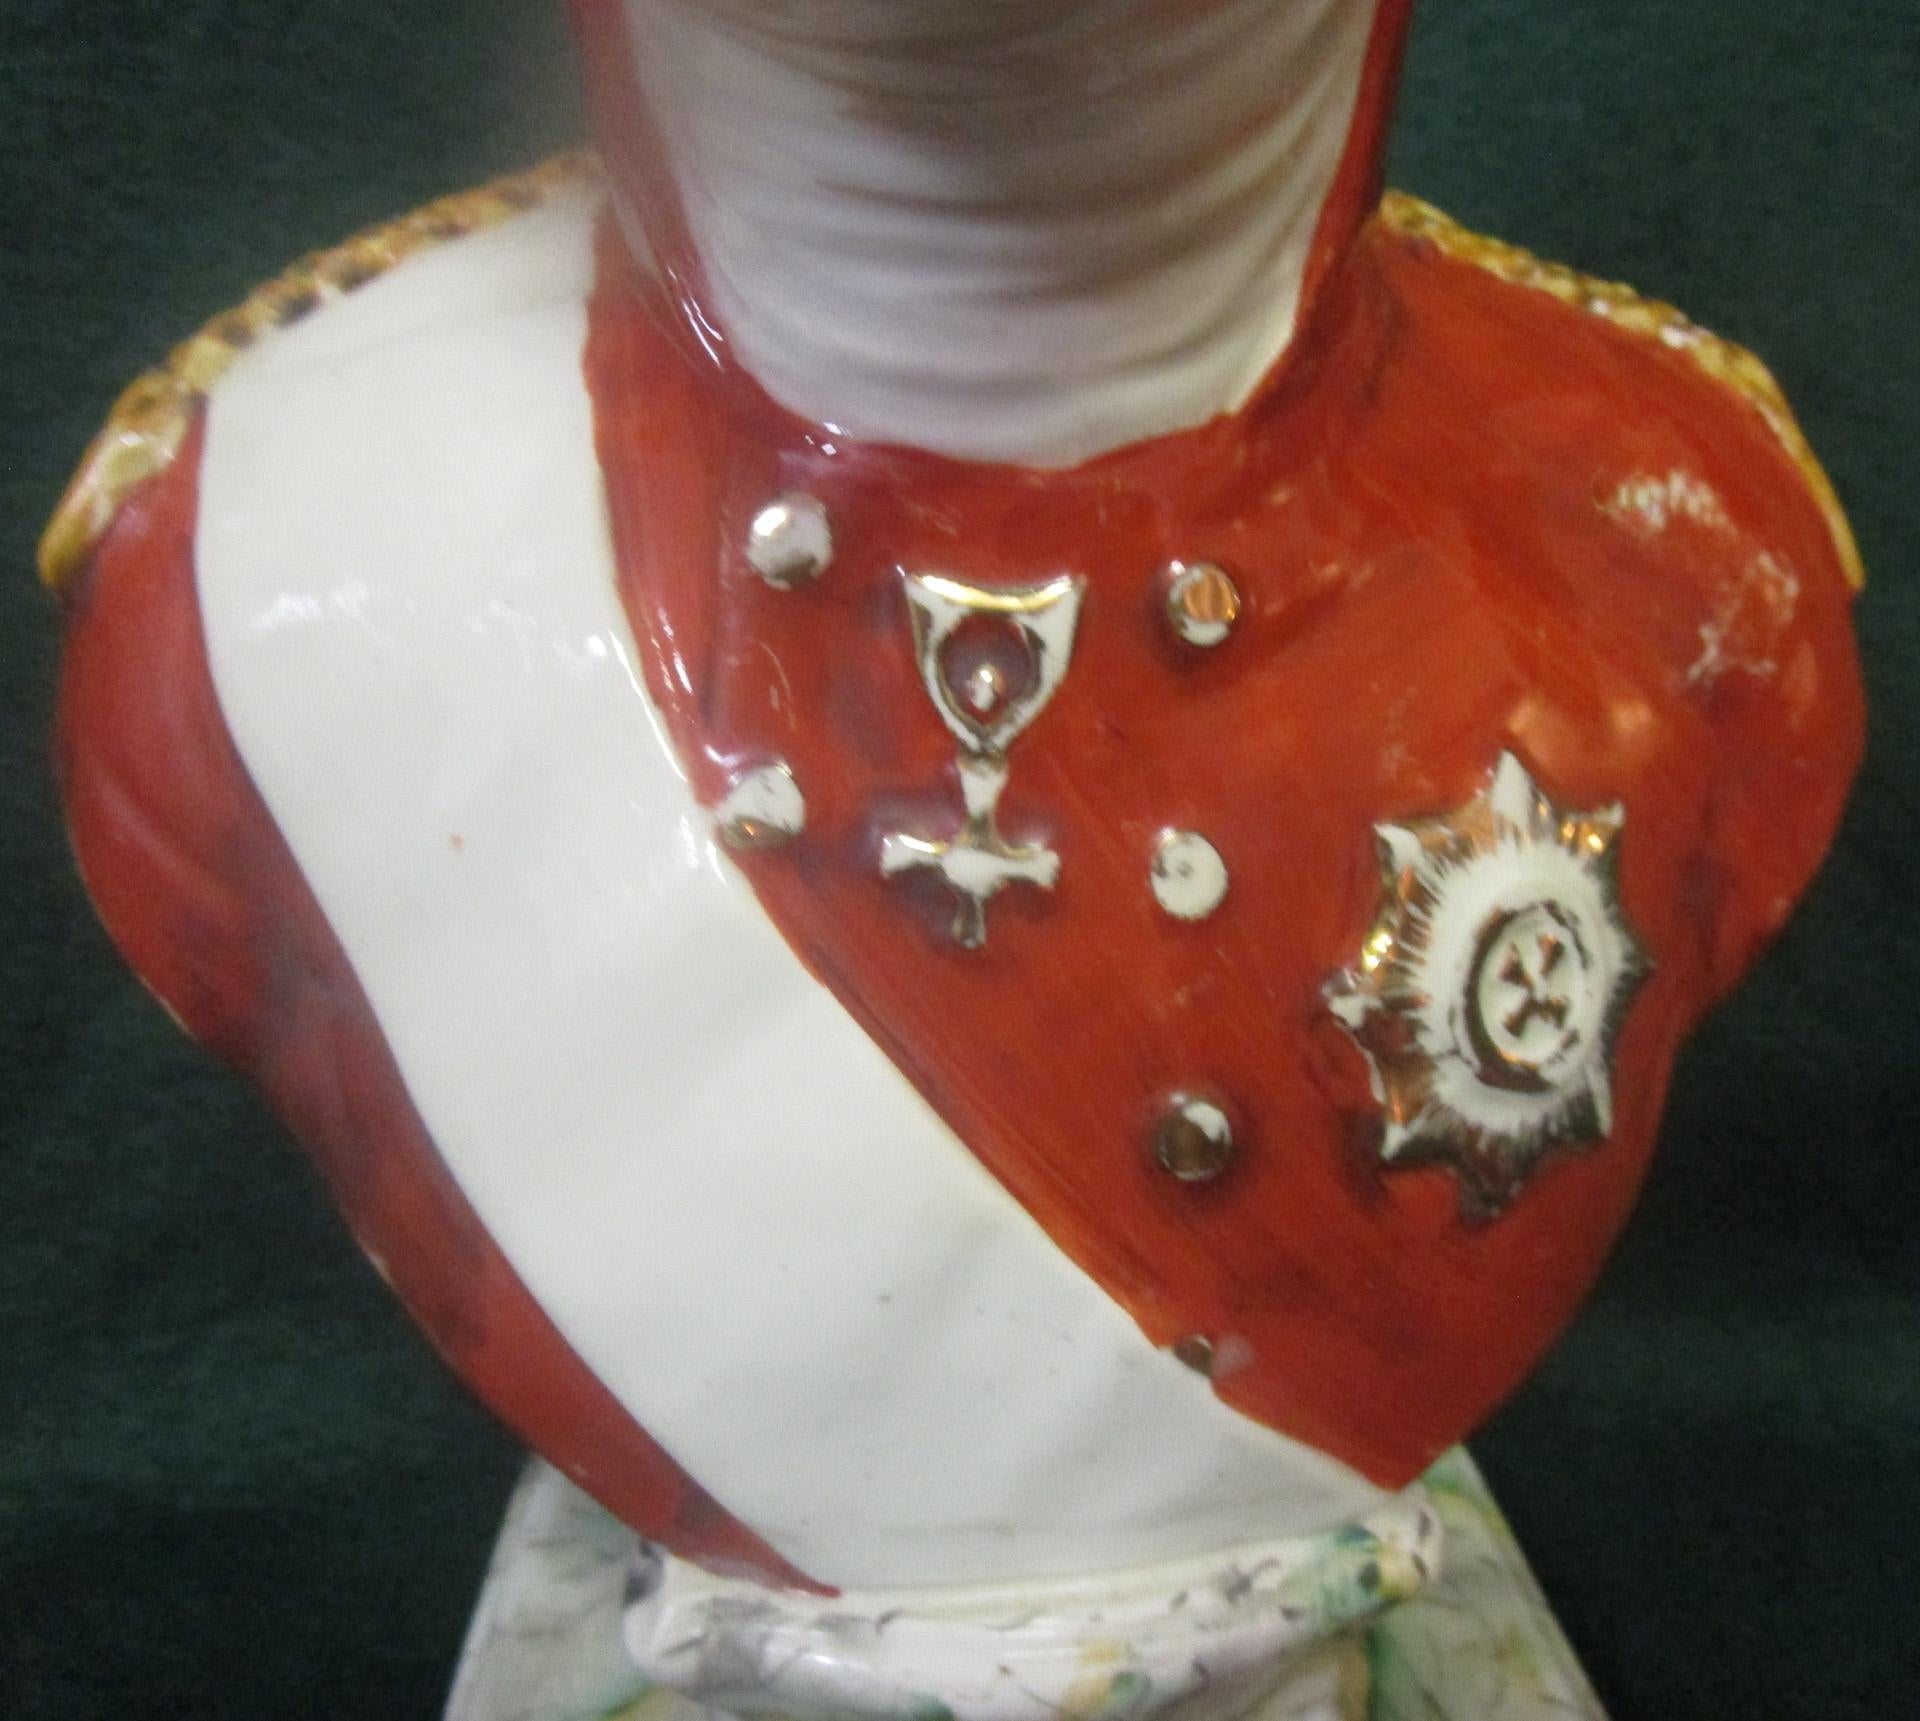 This handsome hand-painted English Staffordshire pottery bust of Czar Alexander Ist of Russia (1796-1855) wears a modeled military uniform with white sash. The bust is turned slightly to the right and sits upon a modeled waisted plinth with faux